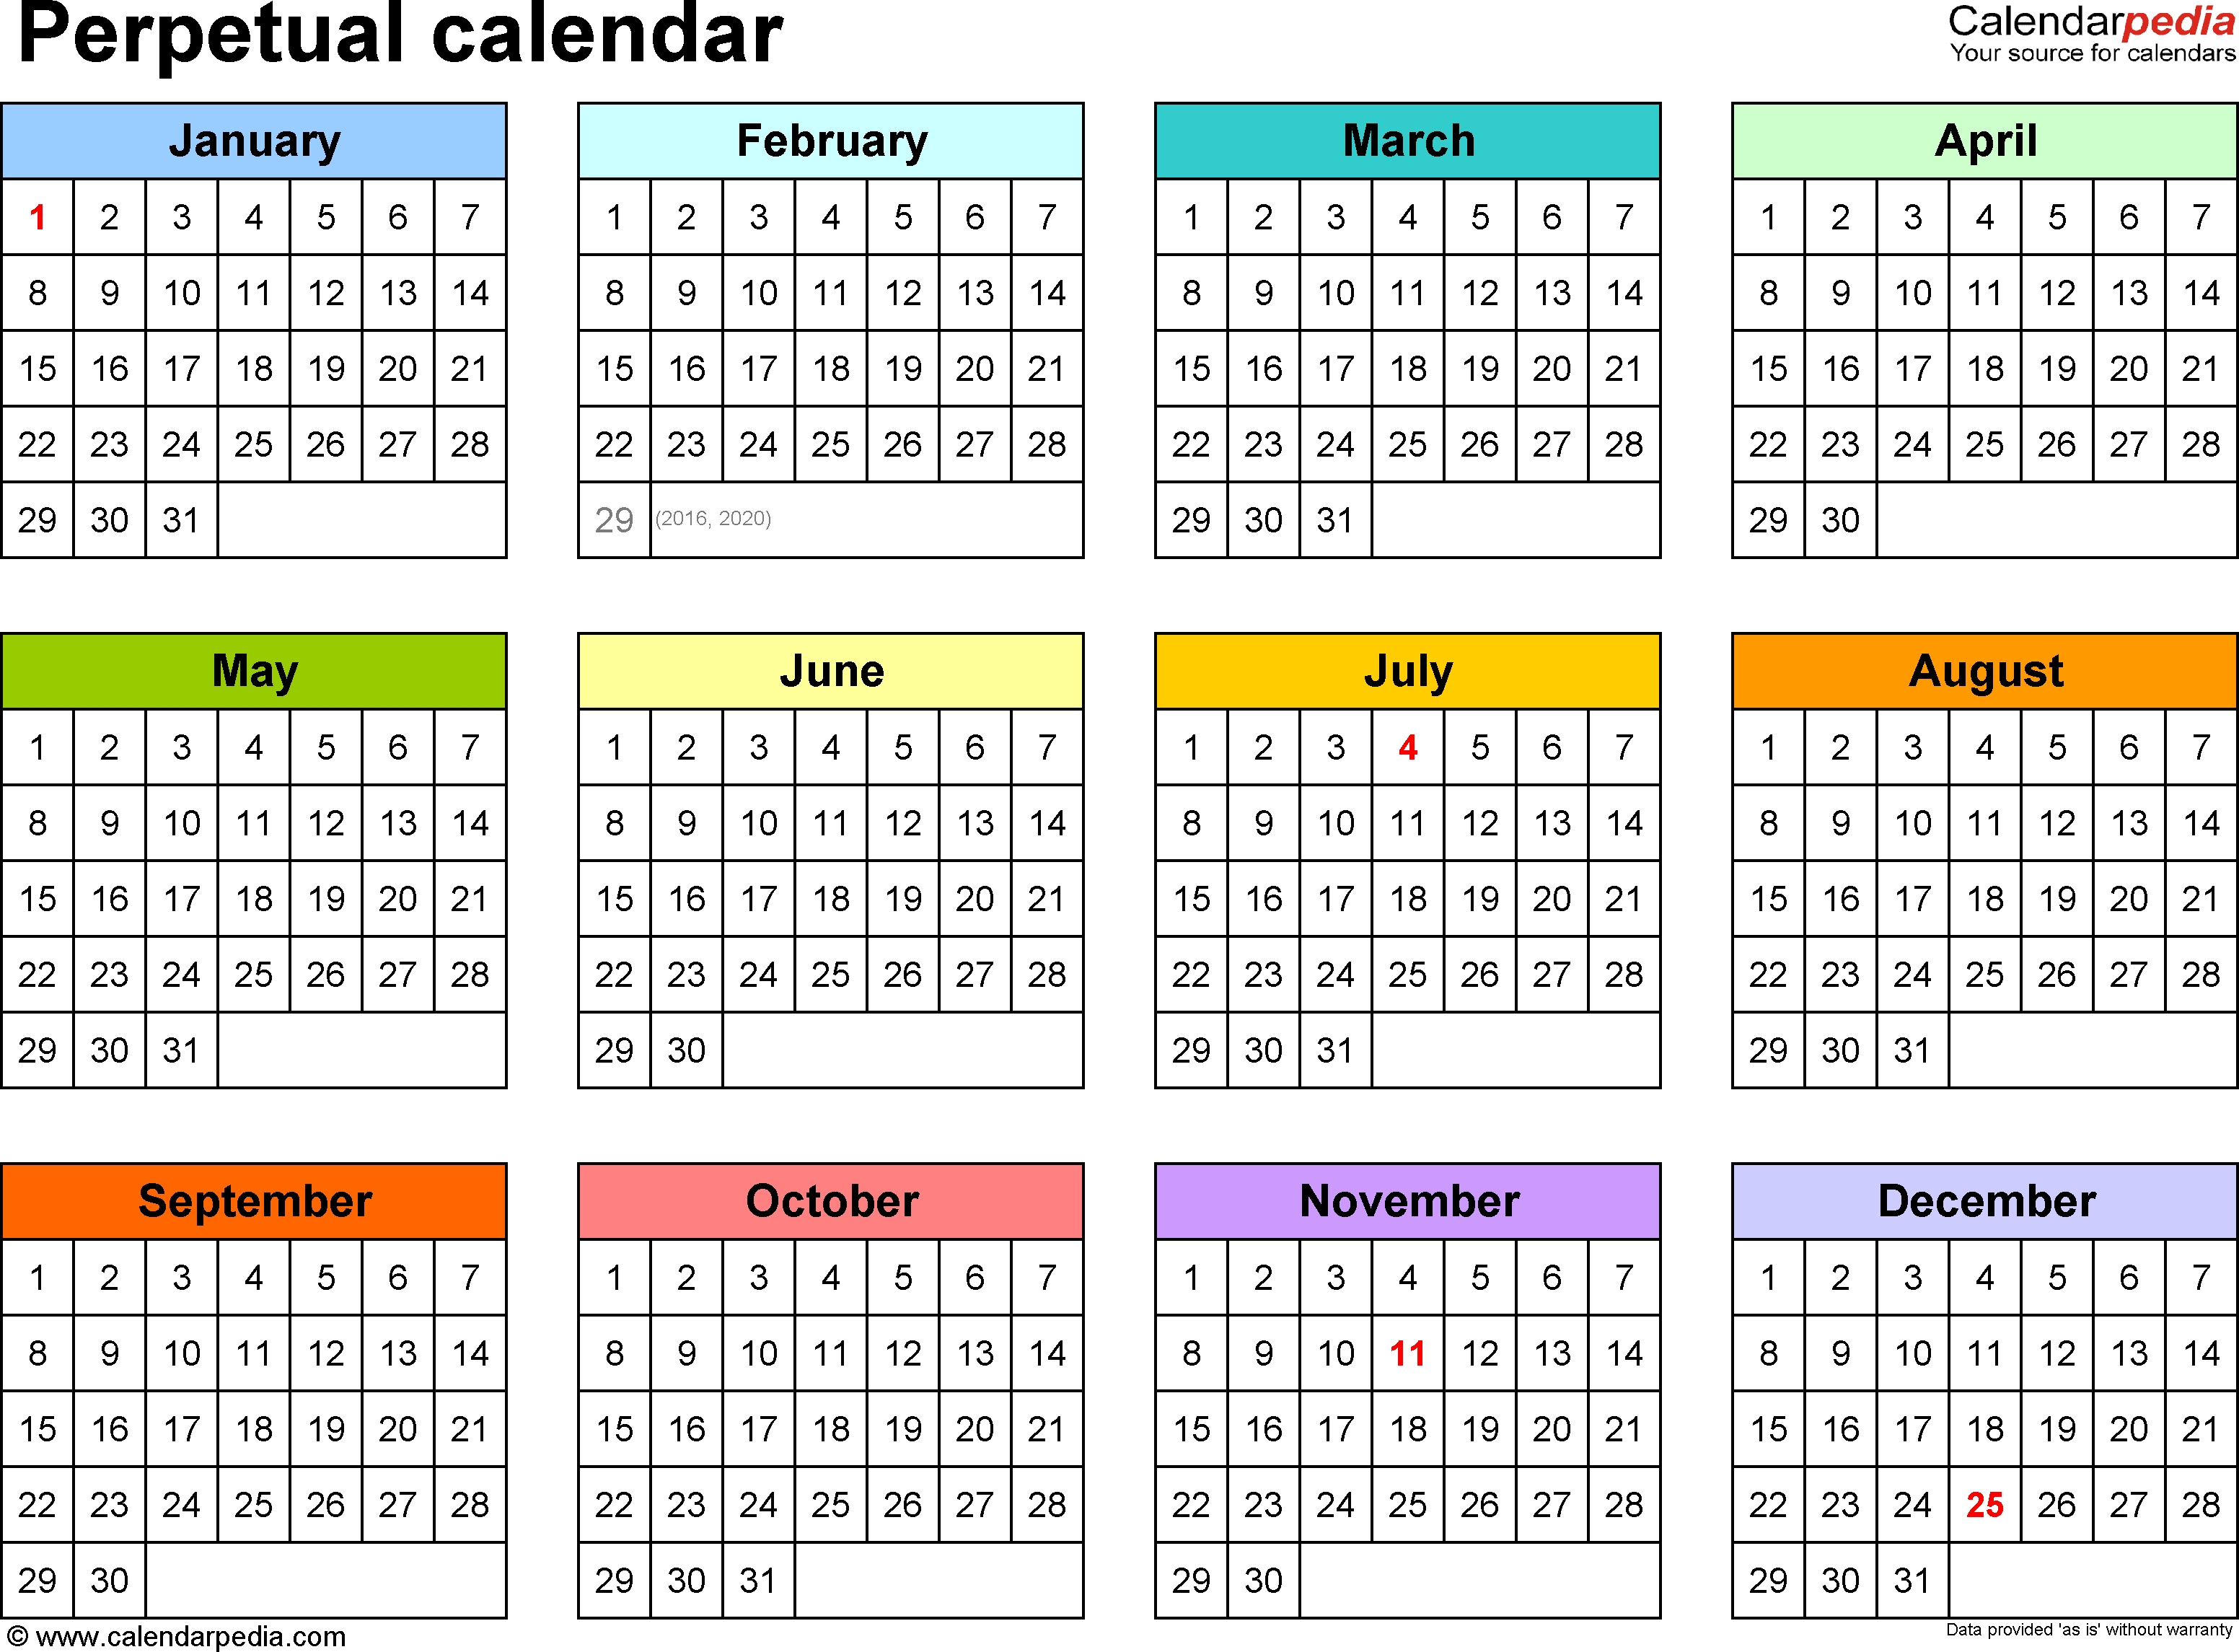 Perpetual Calendars - 7 Free Printable Word Templates Monthly Calendar No Year